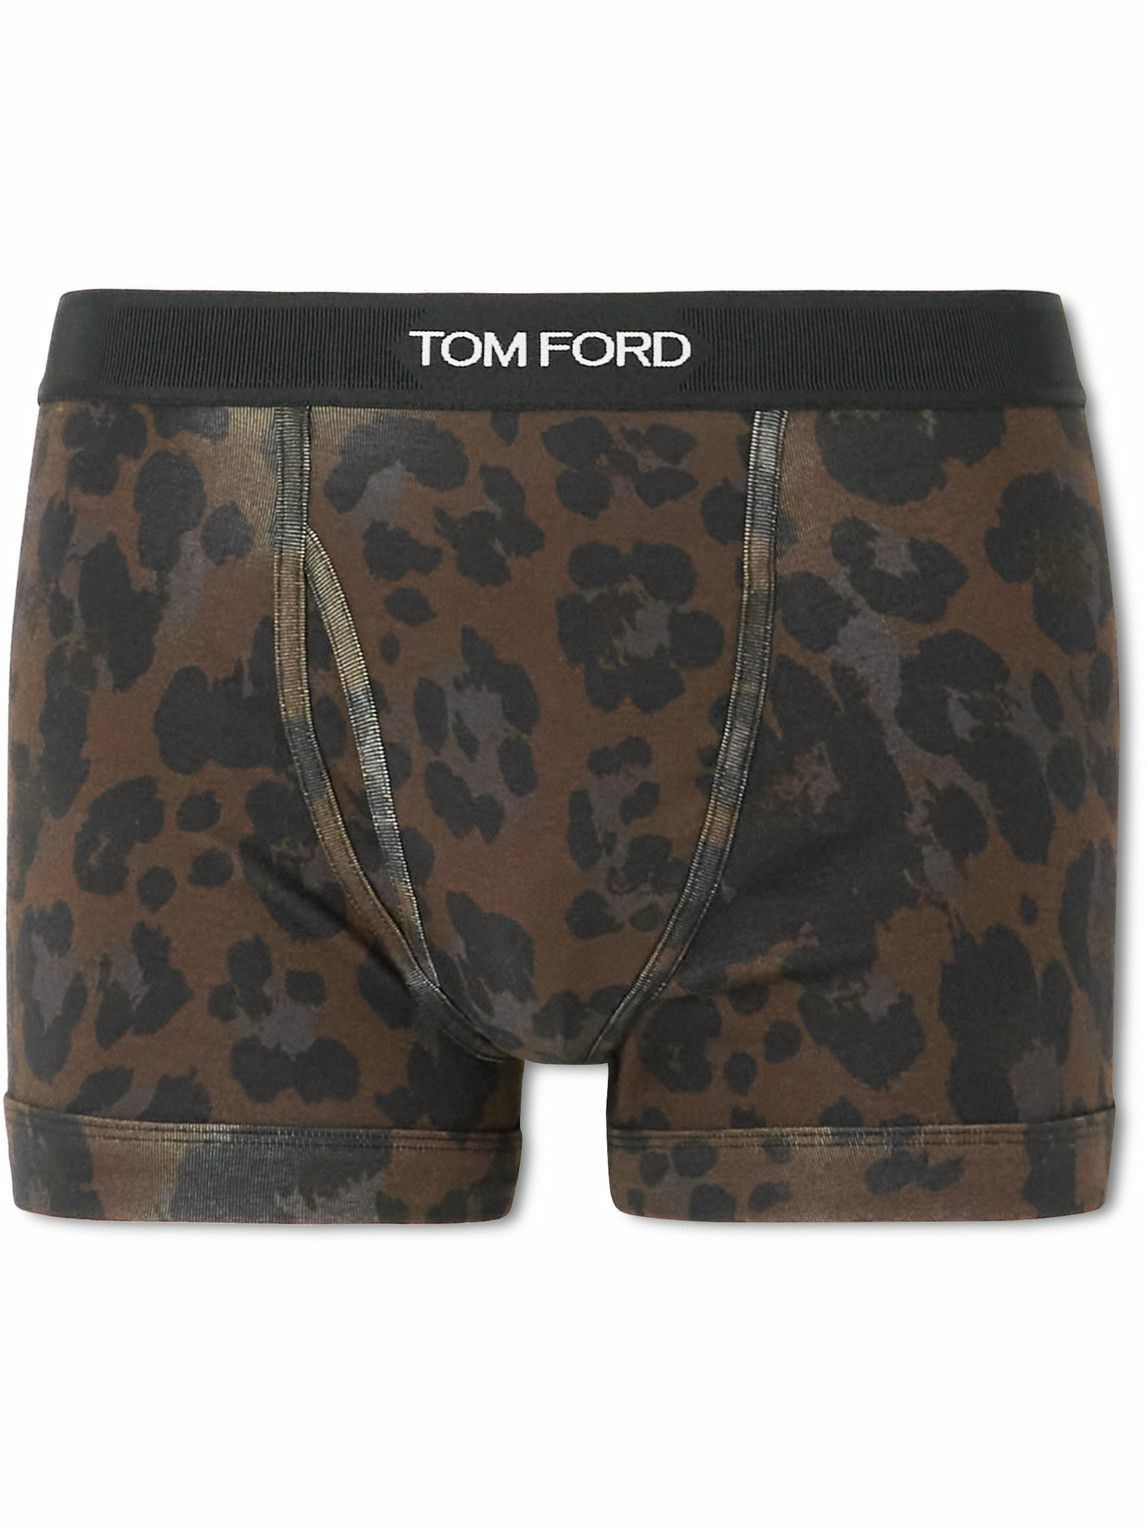 TOM FORD - Leopard-Print Stretch-Cotton Boxer Briefs - Brown TOM FORD